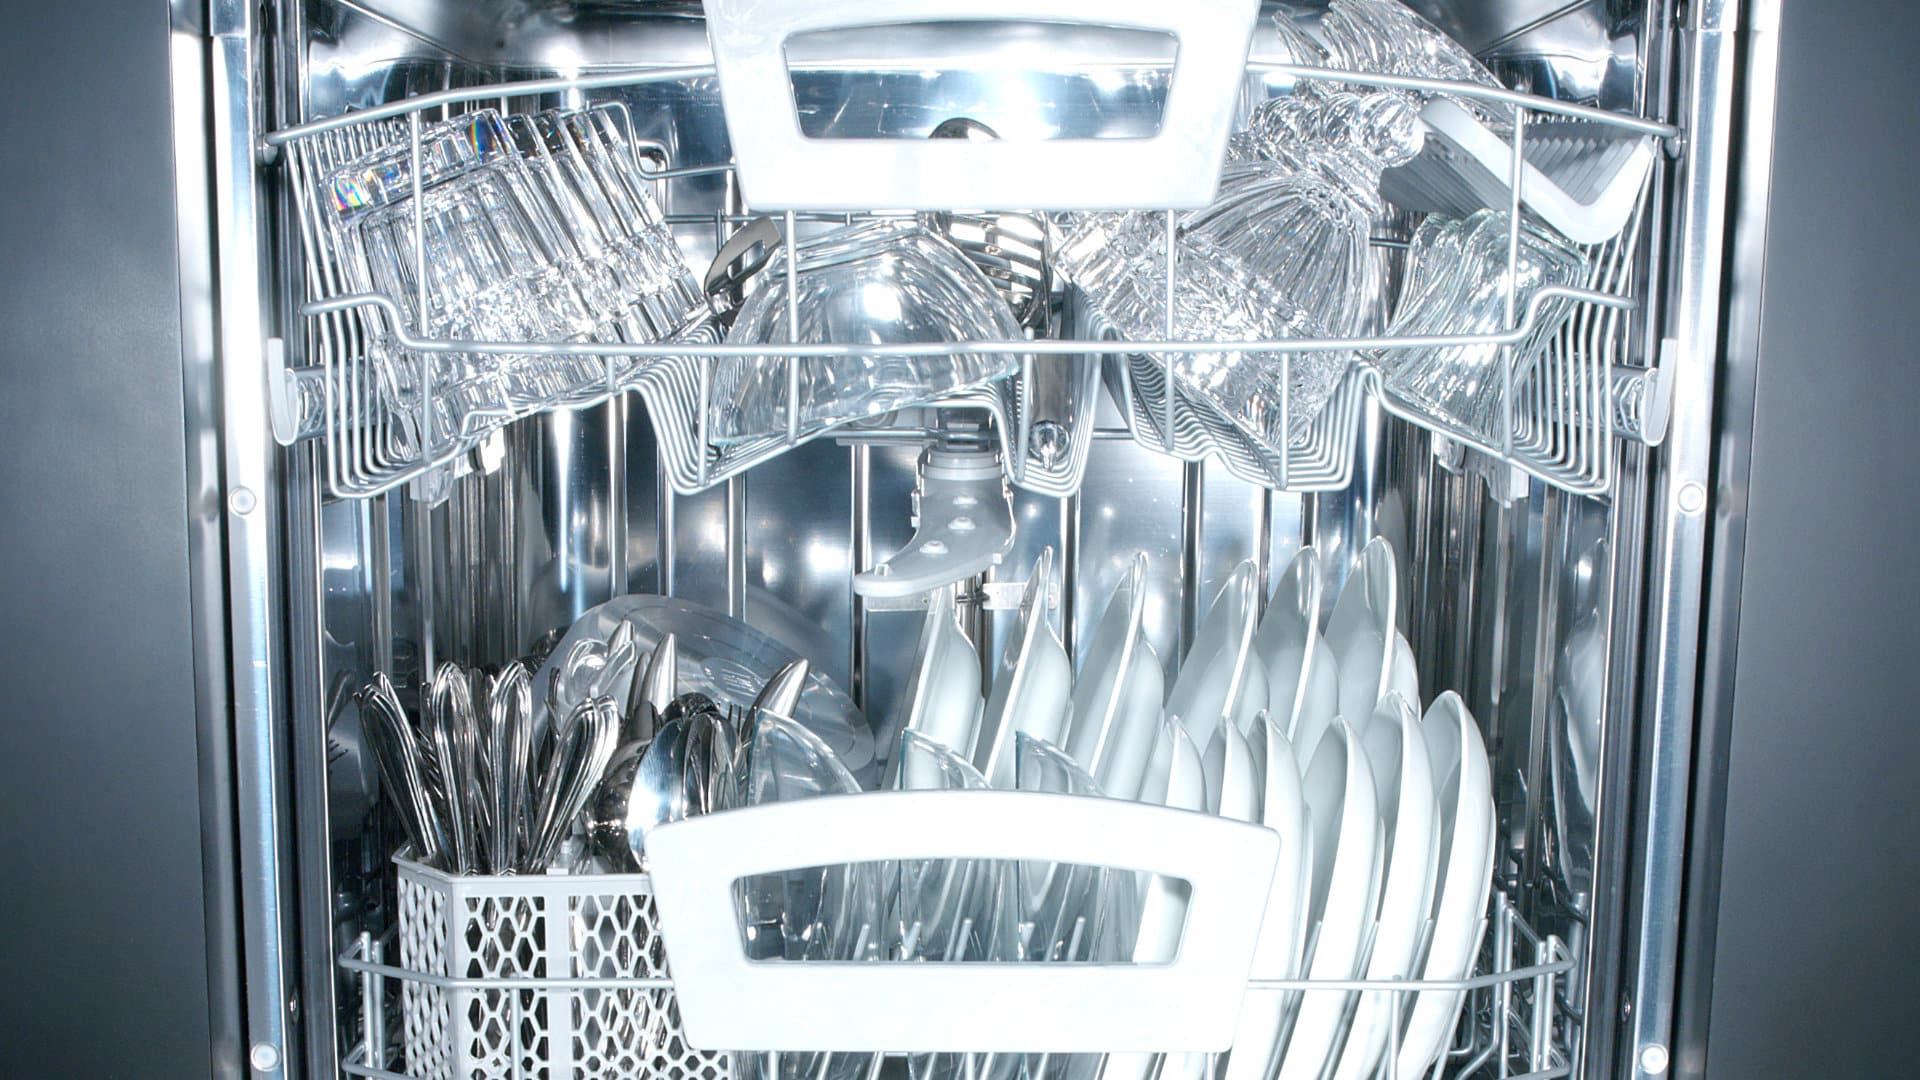 Featured image for “How to Fix a Dishwasher Not Cleaning Properly”